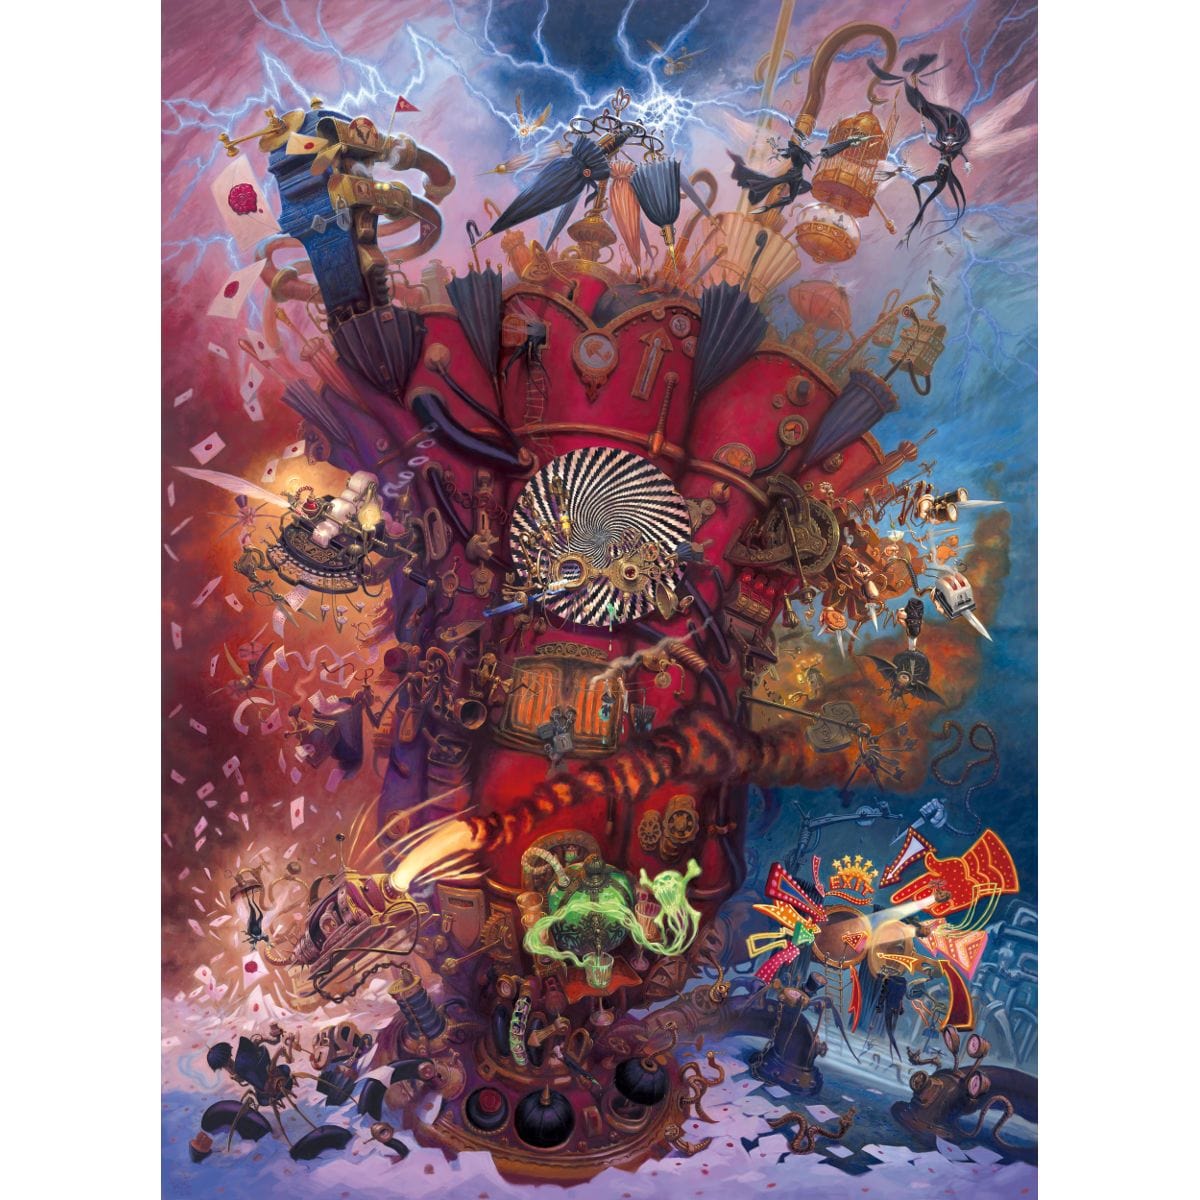 SNEAK Contraption Print - Print - Original Magic Art - Accessories for Magic the Gathering and other card games